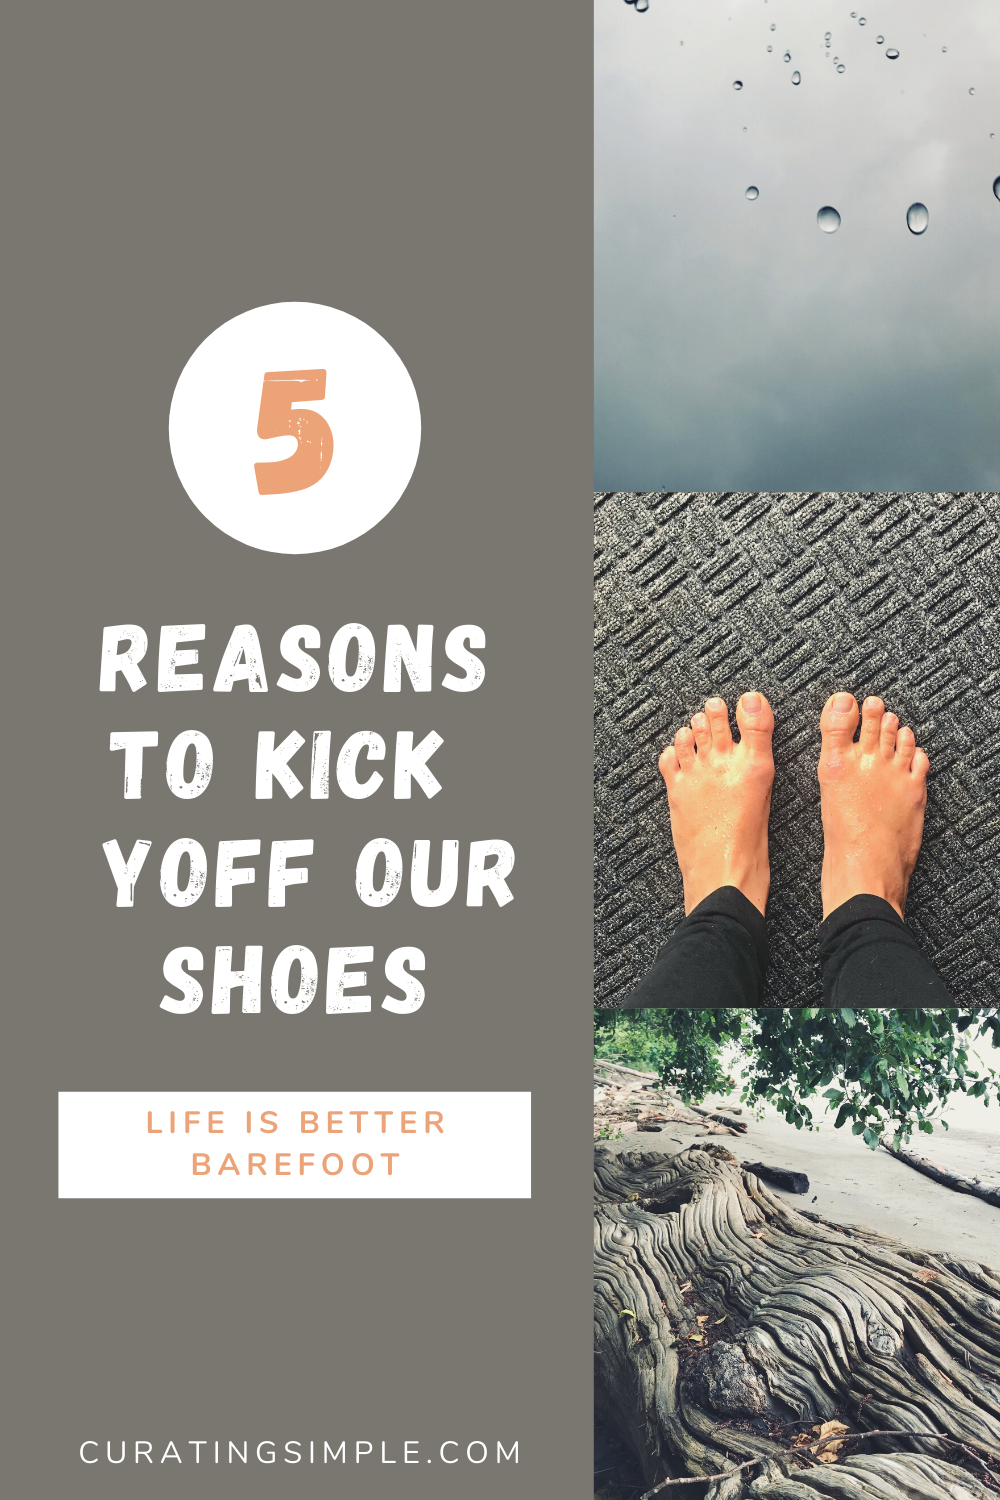 Life is better barefoot